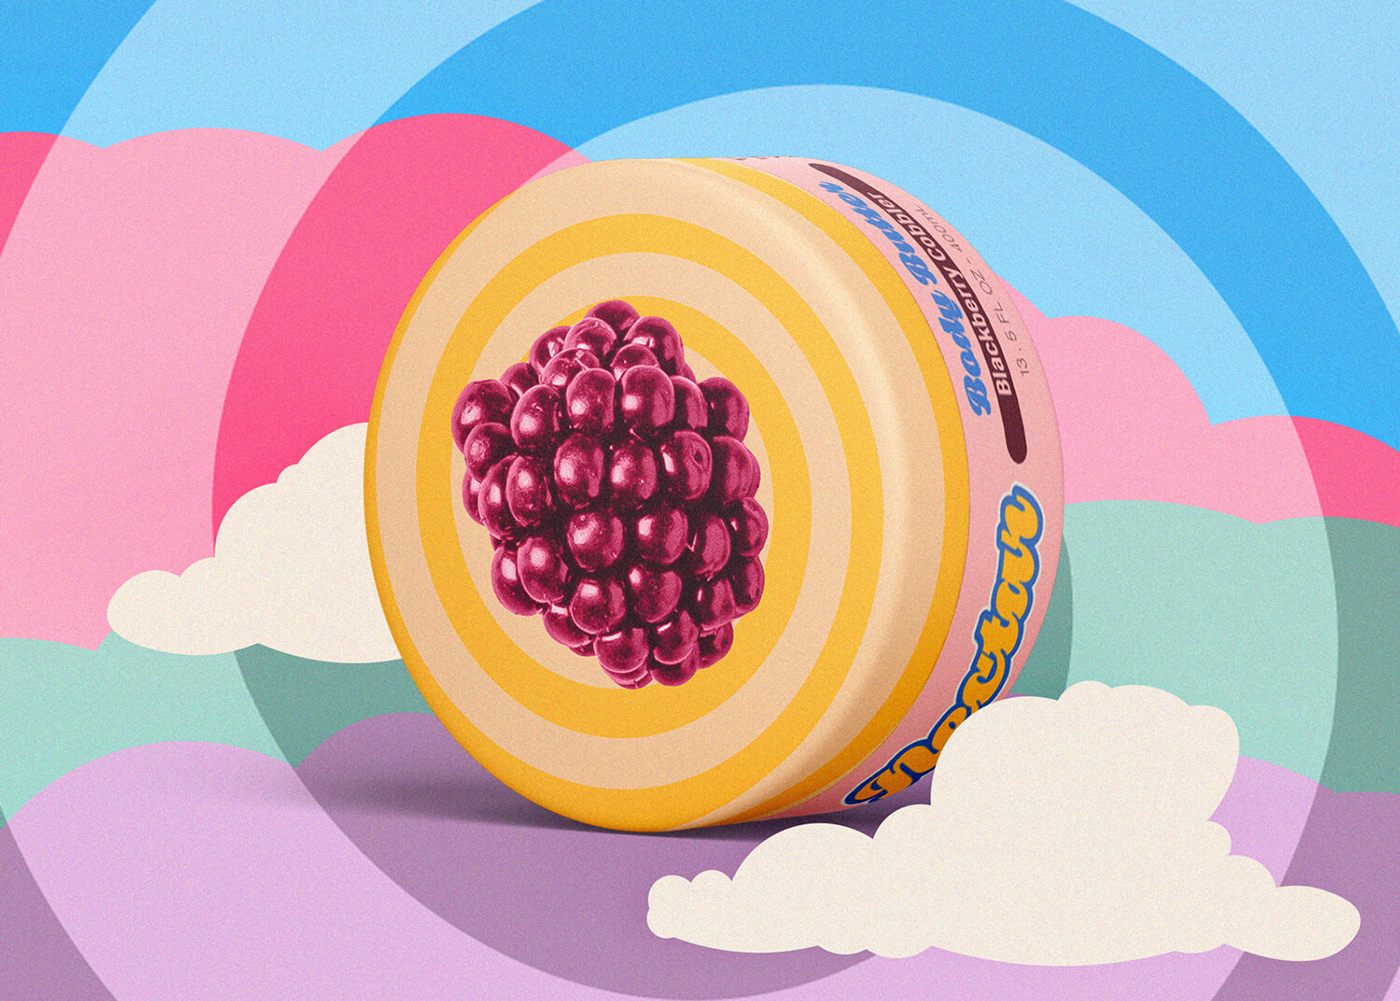 A body butter jar mockup with colorful swirls and clouds.